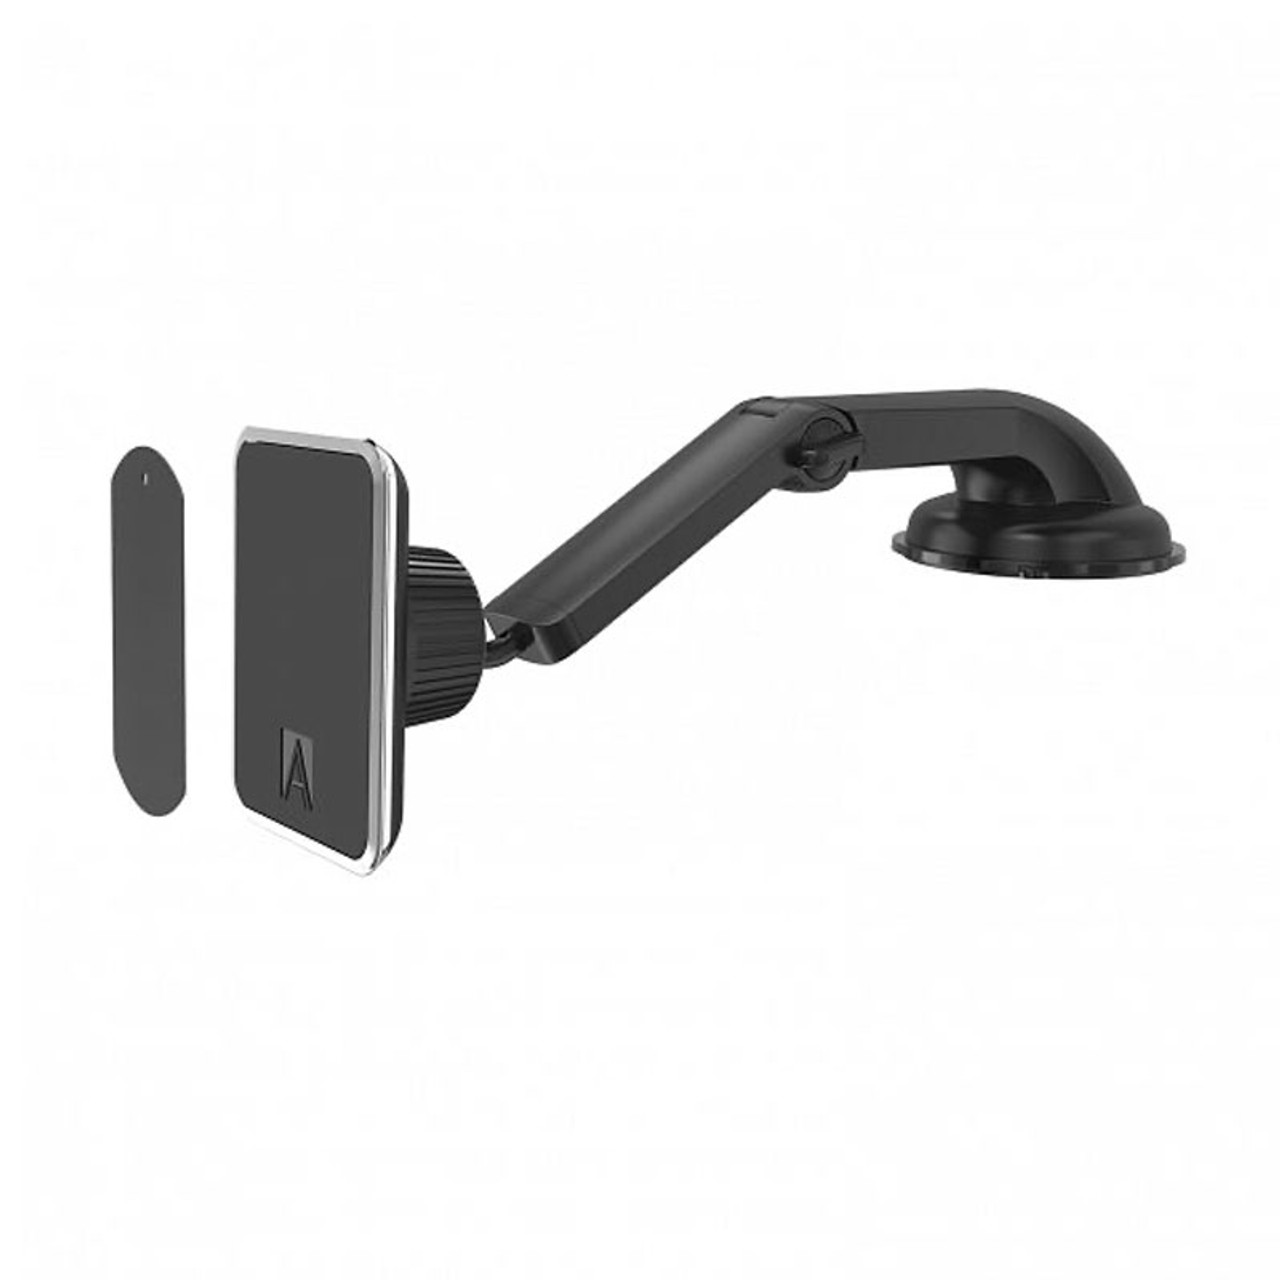 Aerpro APSMSHLD Magmate PRO Strong magnetic suction mount - www ...